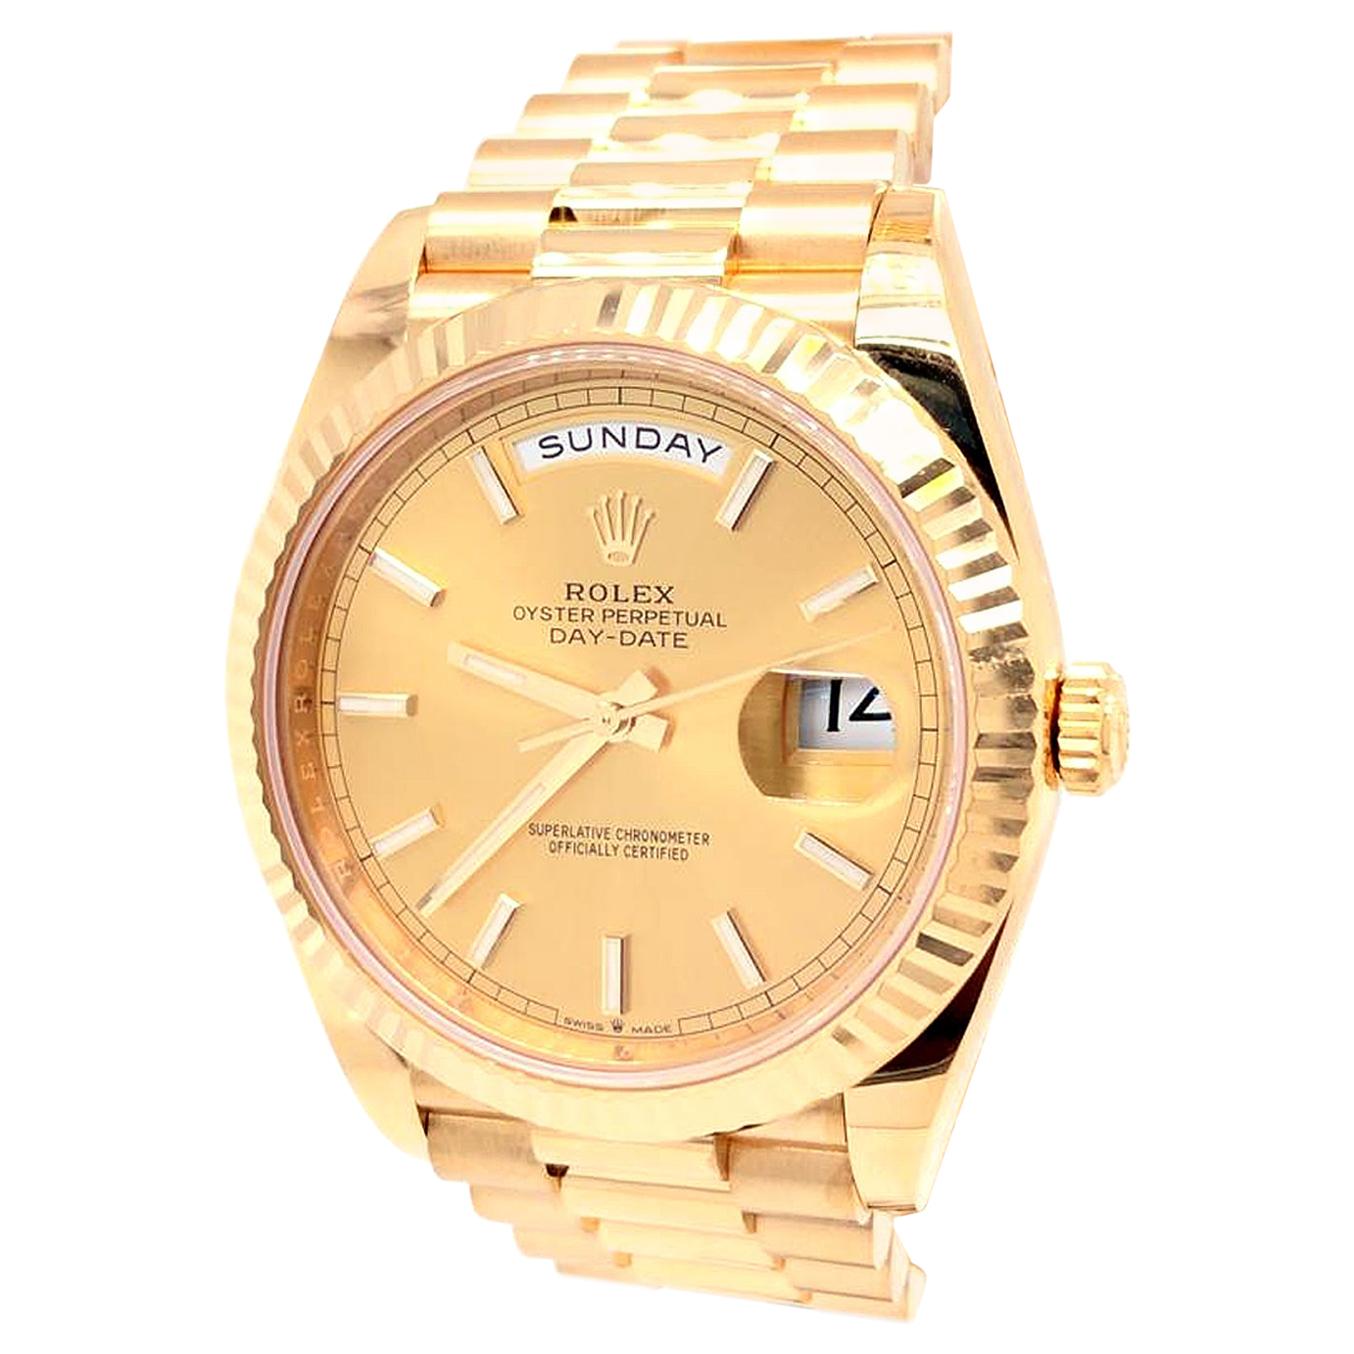 Rolex Day-Date President 18k Yellow Gold Champagne Men's Watch 228238